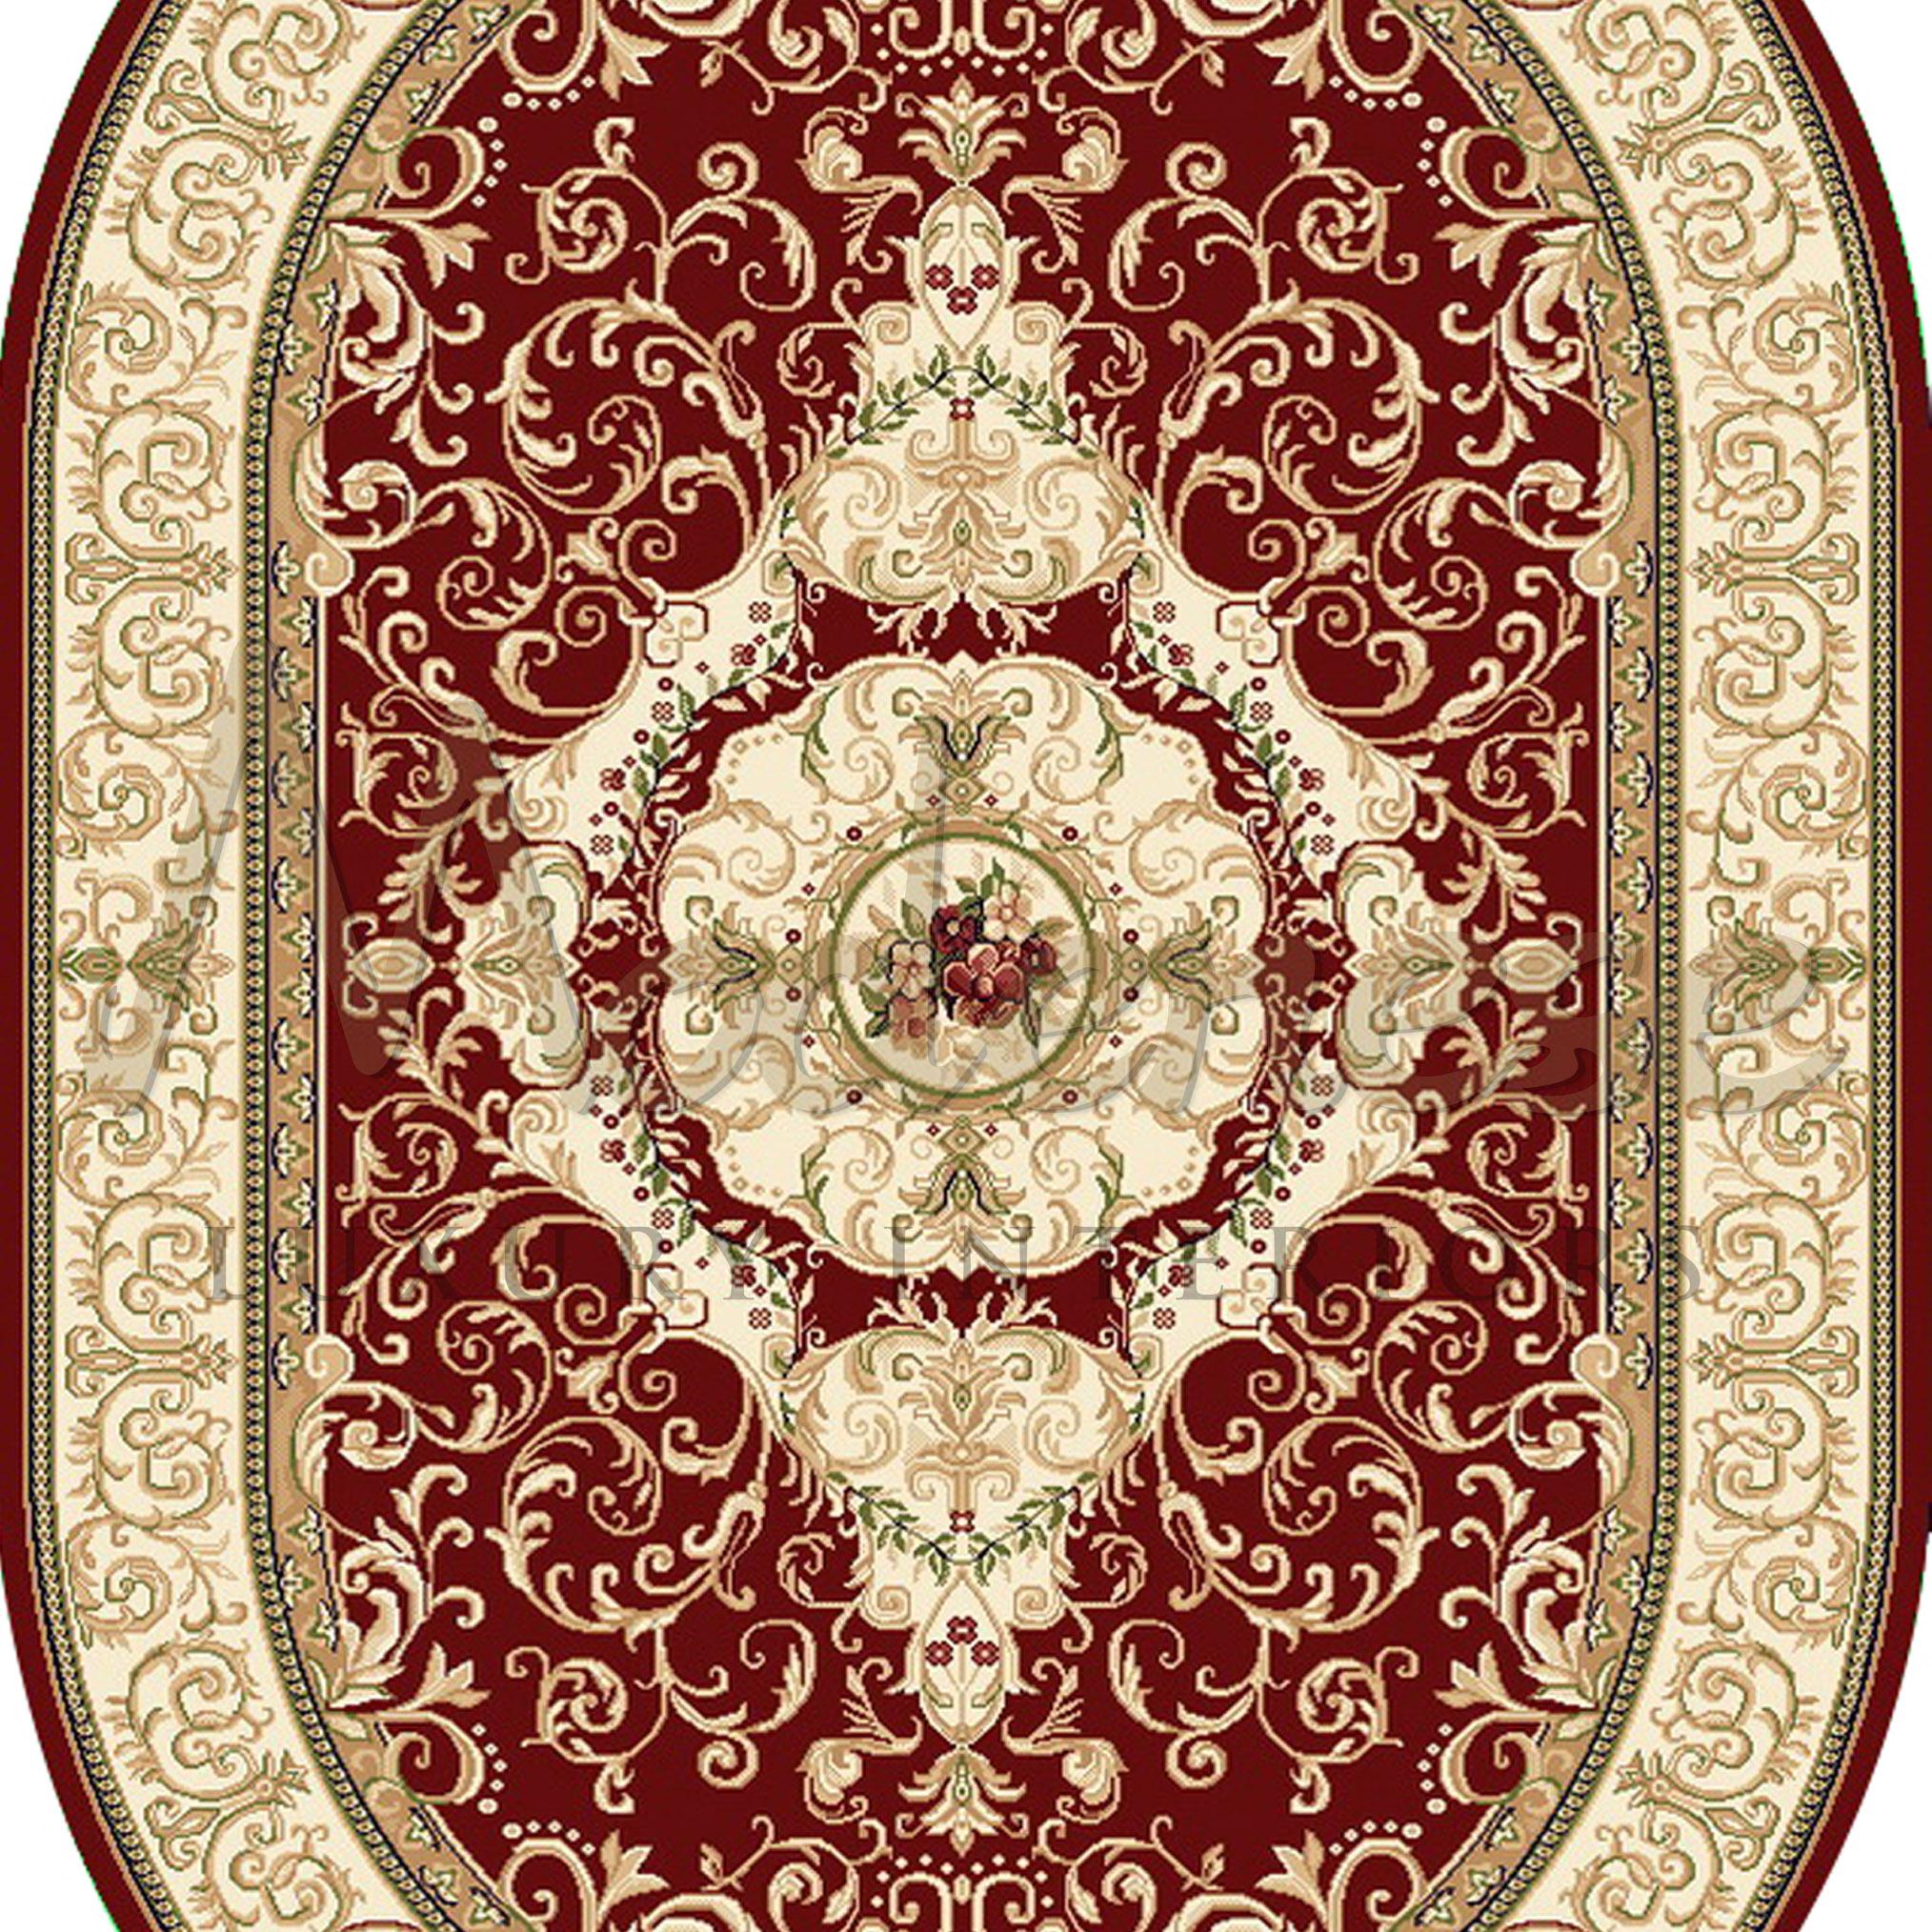 Italian 21st Century Handknotted Oval Bamboo Silk Rug by Modenese Interiors, Scarlet For Sale